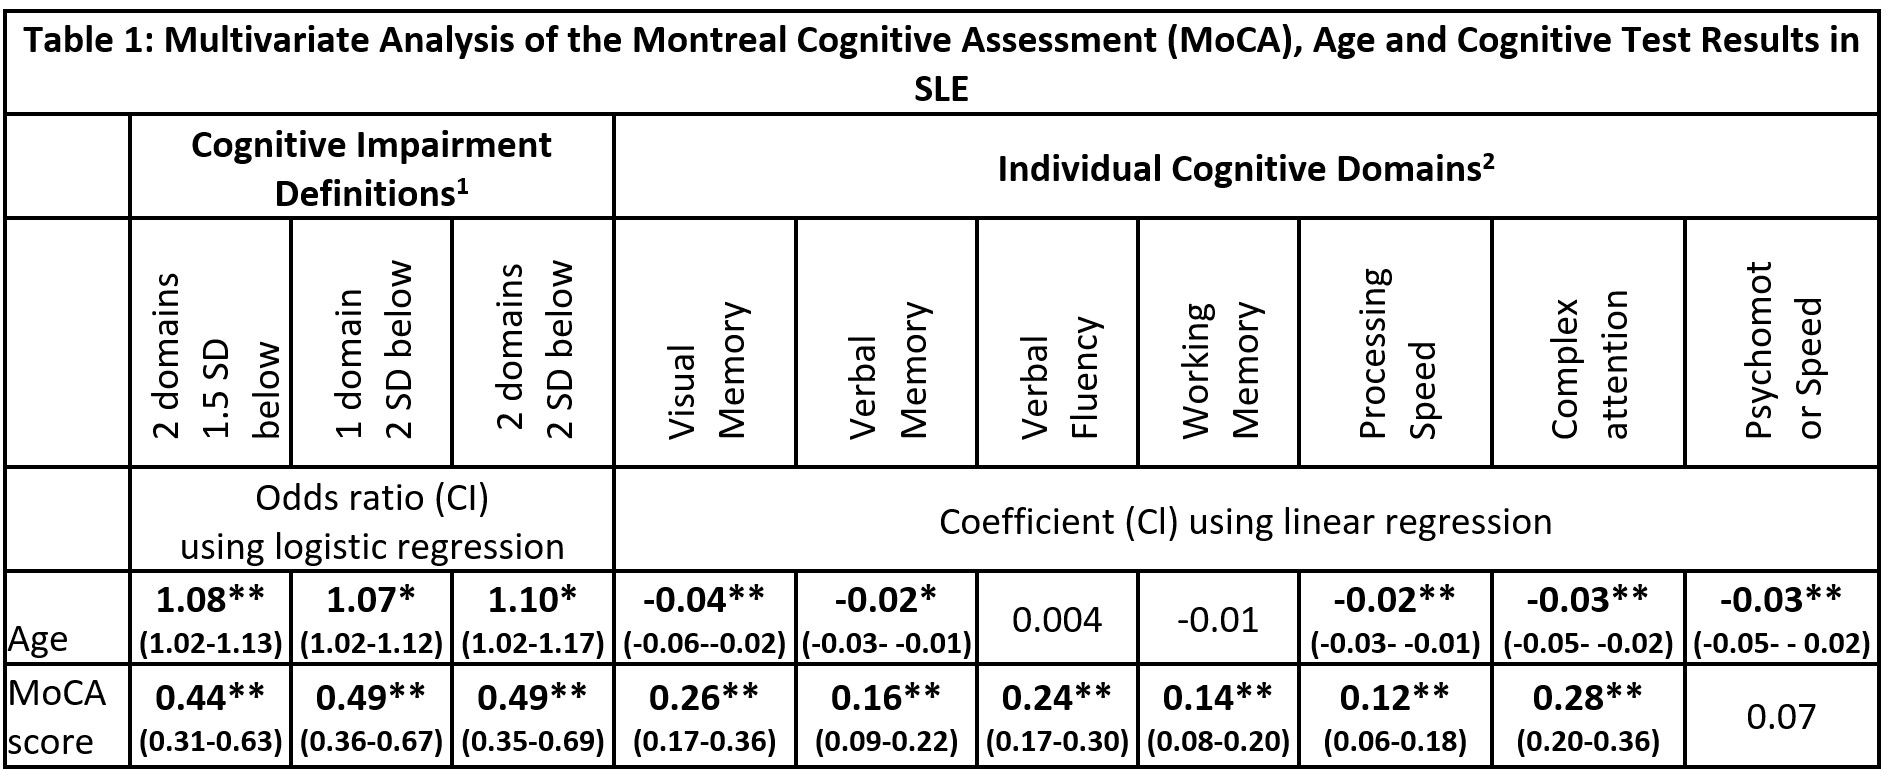 evaluation-of-the-montreal-cognitive-assessment-as-a-screening-tool-for